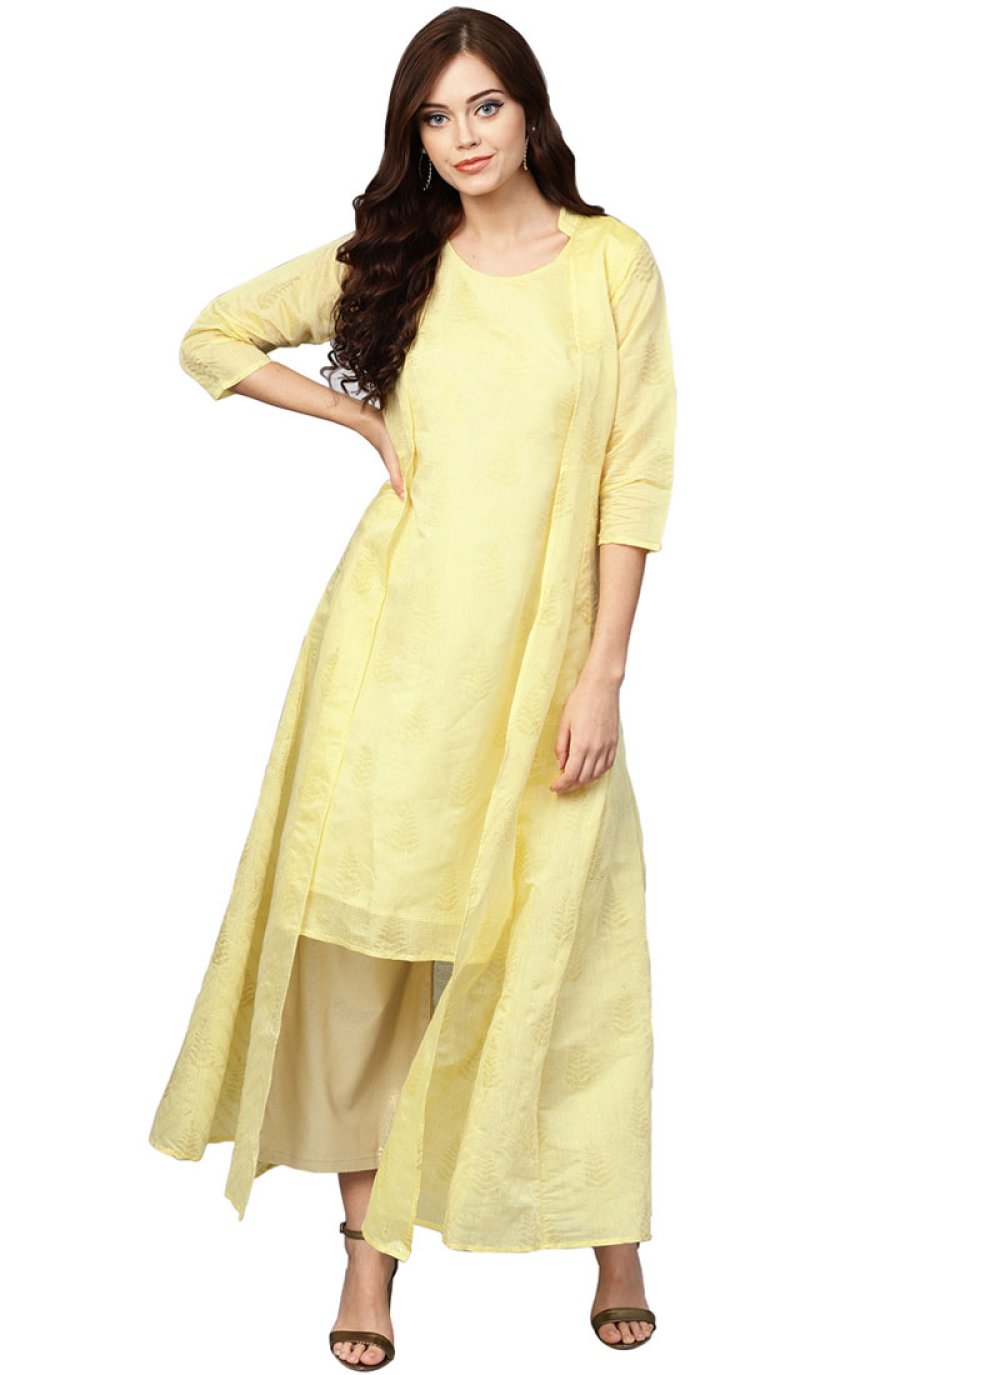 Chanderi Foil print Readymade Designer Suit in Yellow